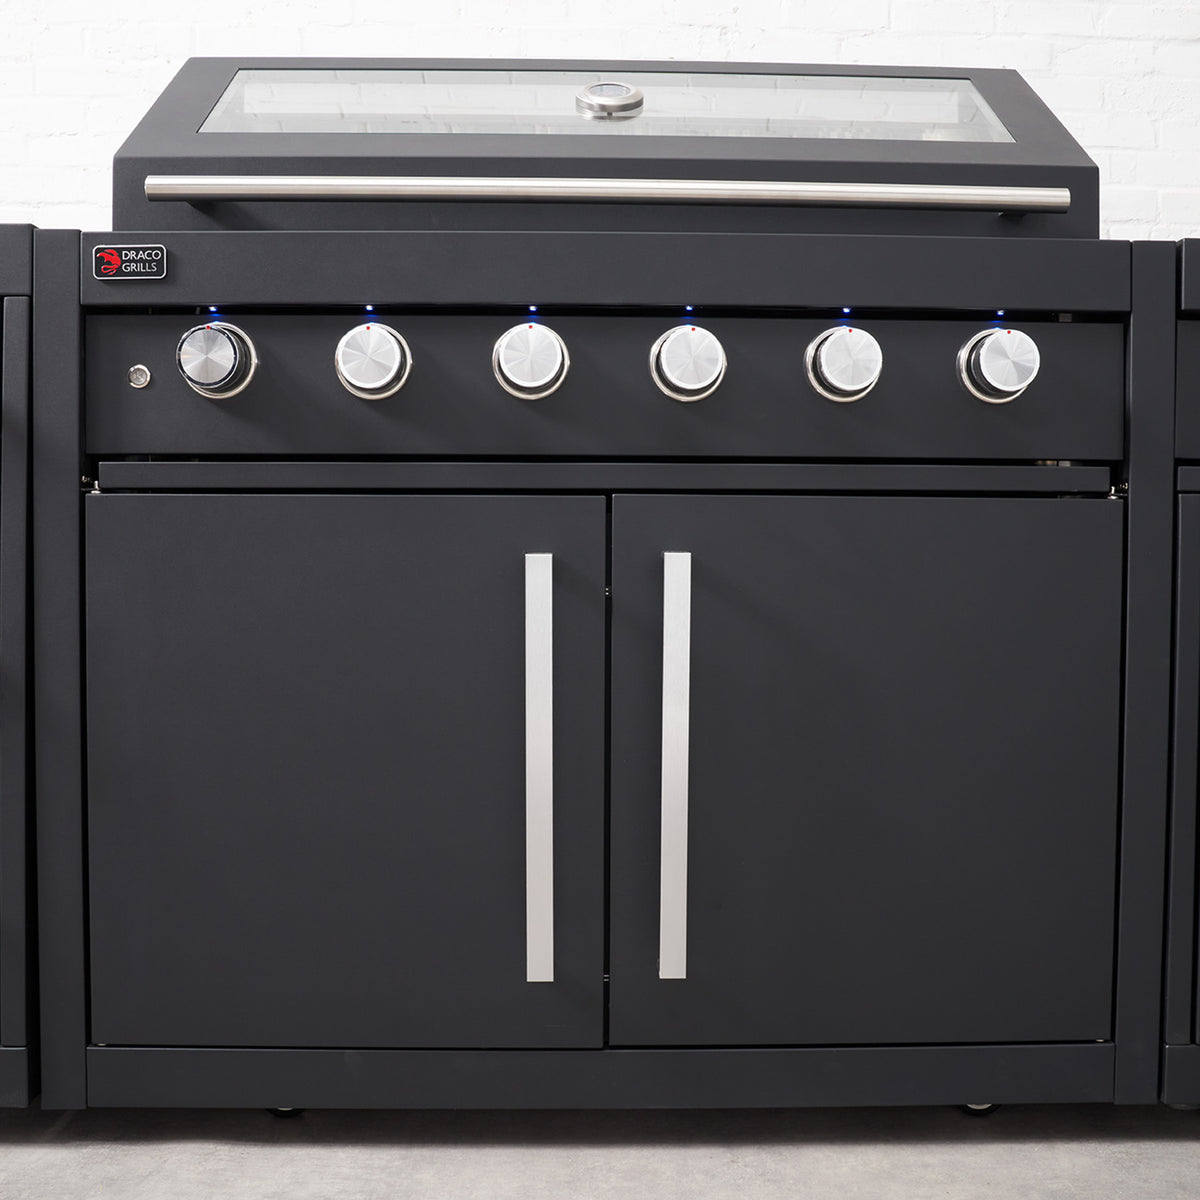 Draco Grills Fusion Black 6 Burner Gas Barbecue with Cabinet